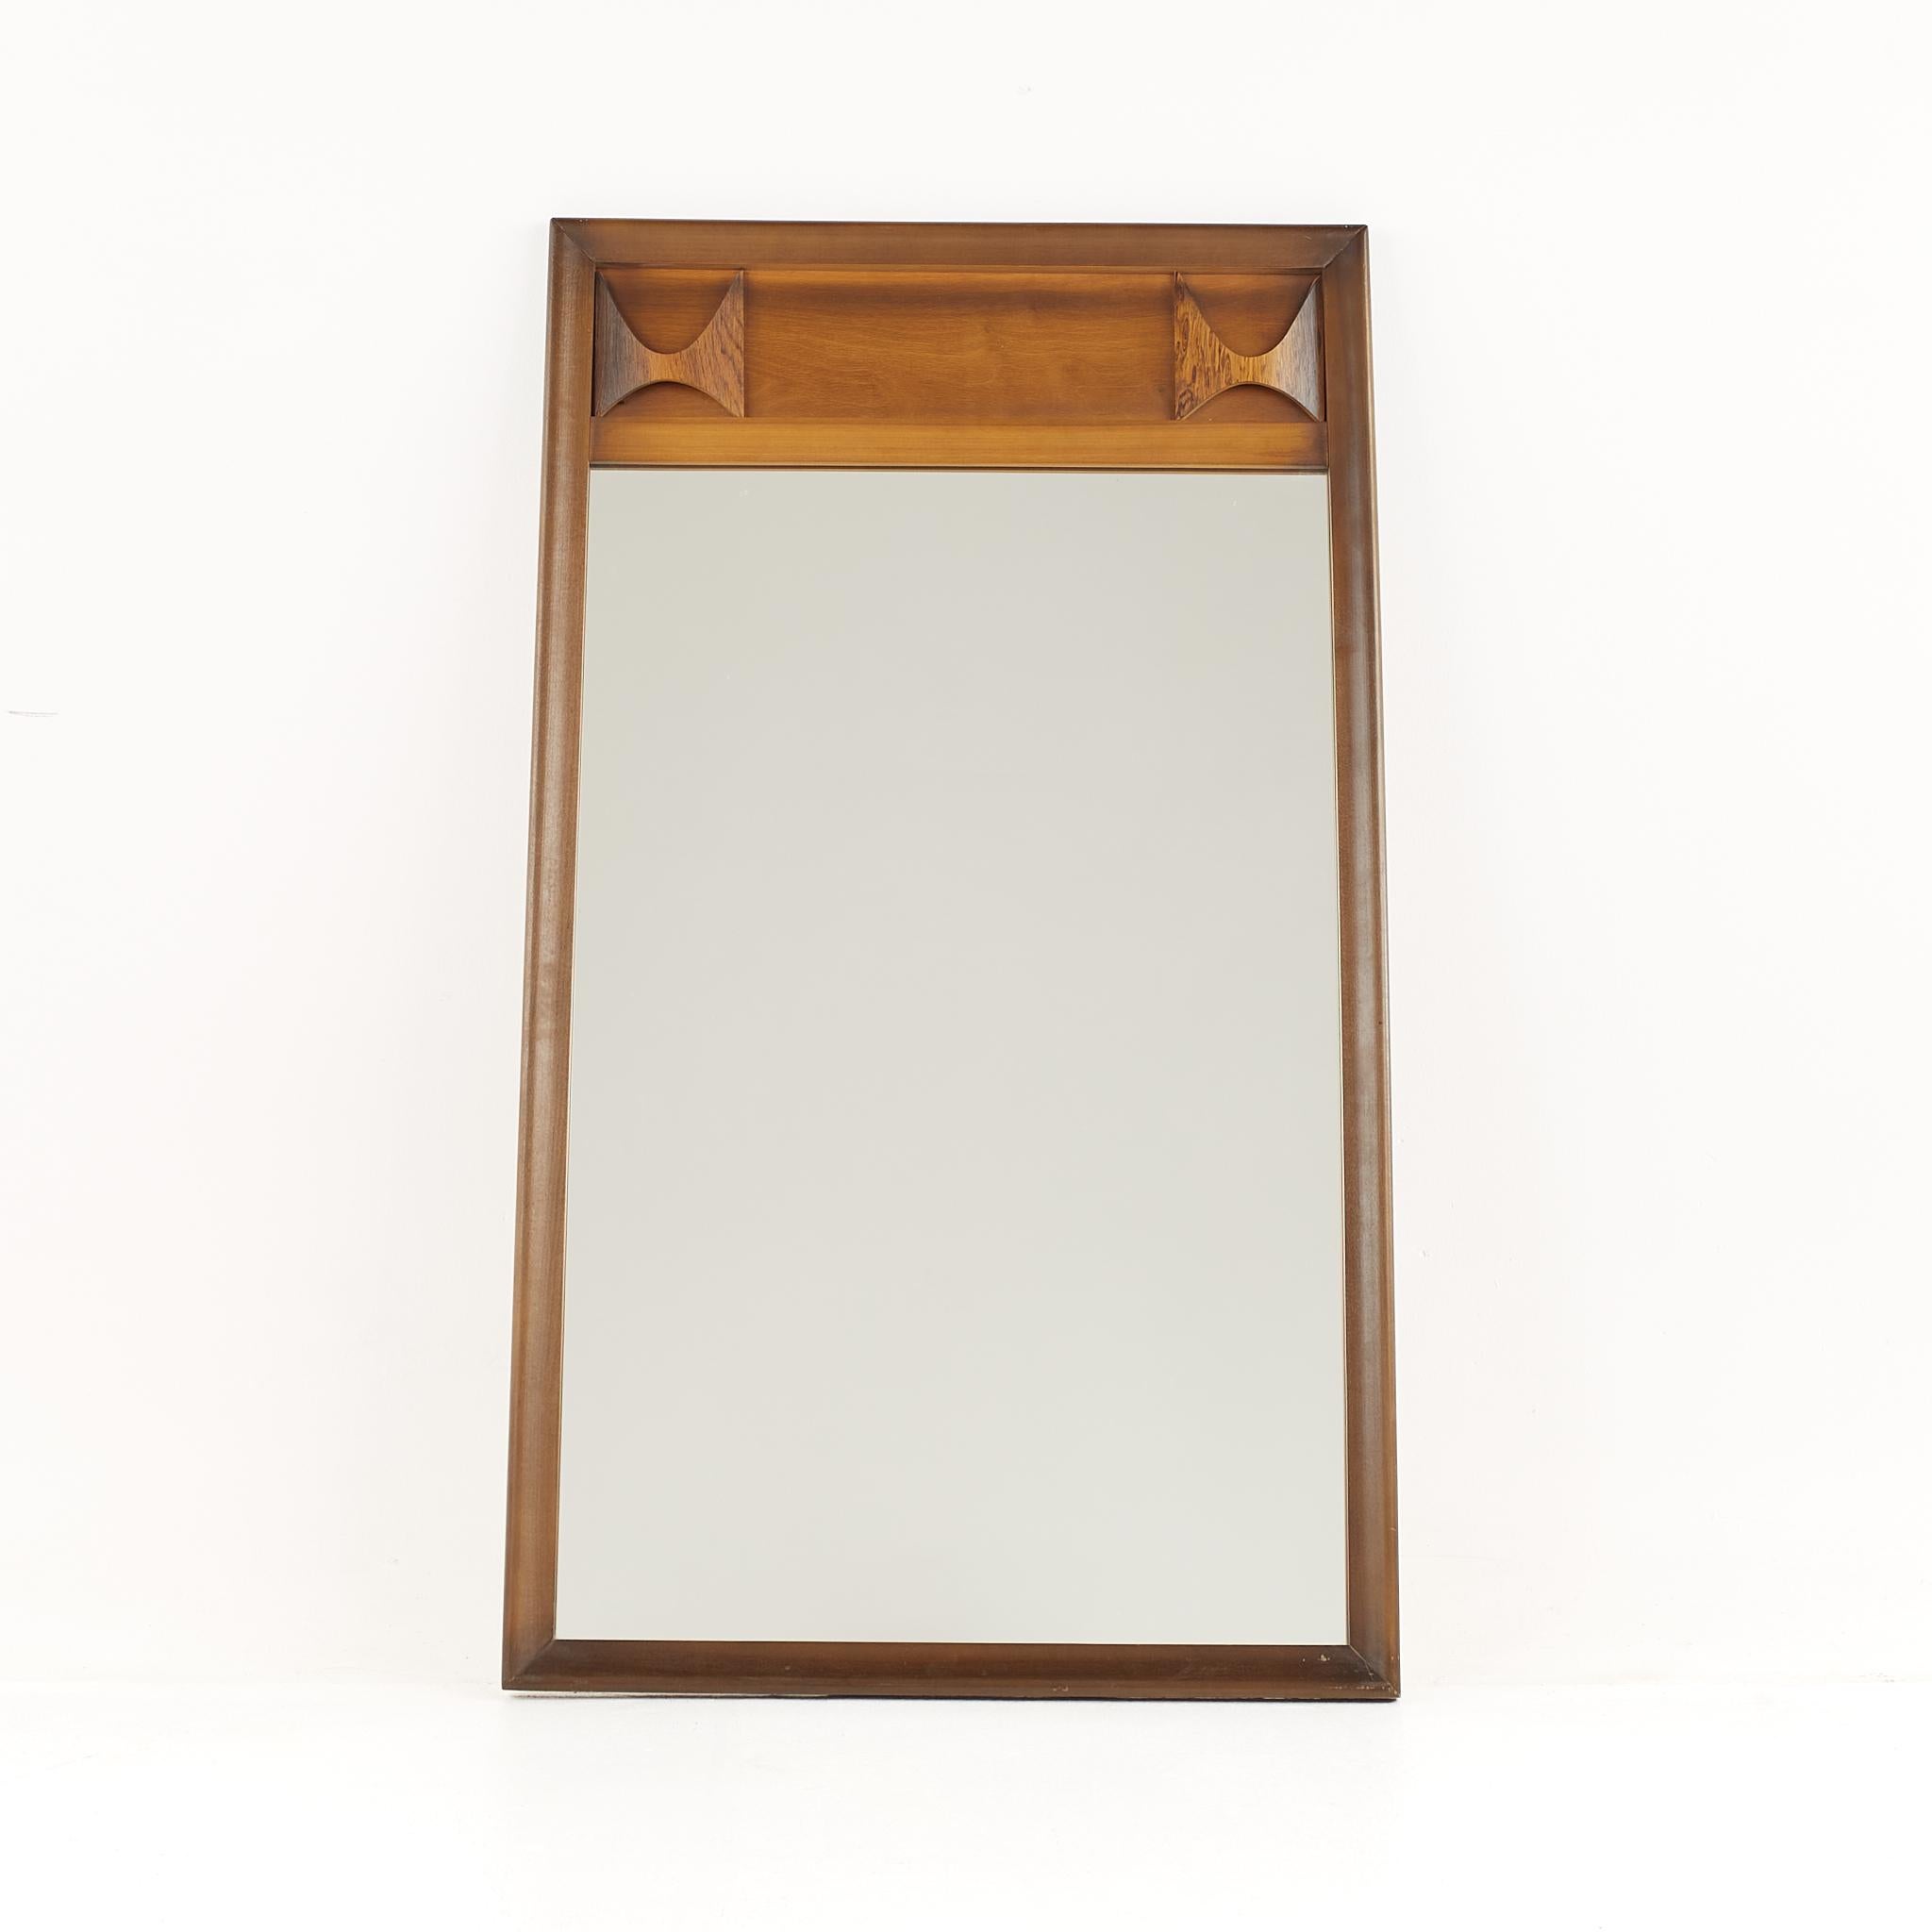 Kent Coffey Perspecta Mid Century 9 Drawer Lowboy Dresser Mirror

This mirror measures: 26 wide x 1 deep x 45 inches high

All pieces of furniture can be had in what we call restored vintage condition. That means the piece is restored upon purchase